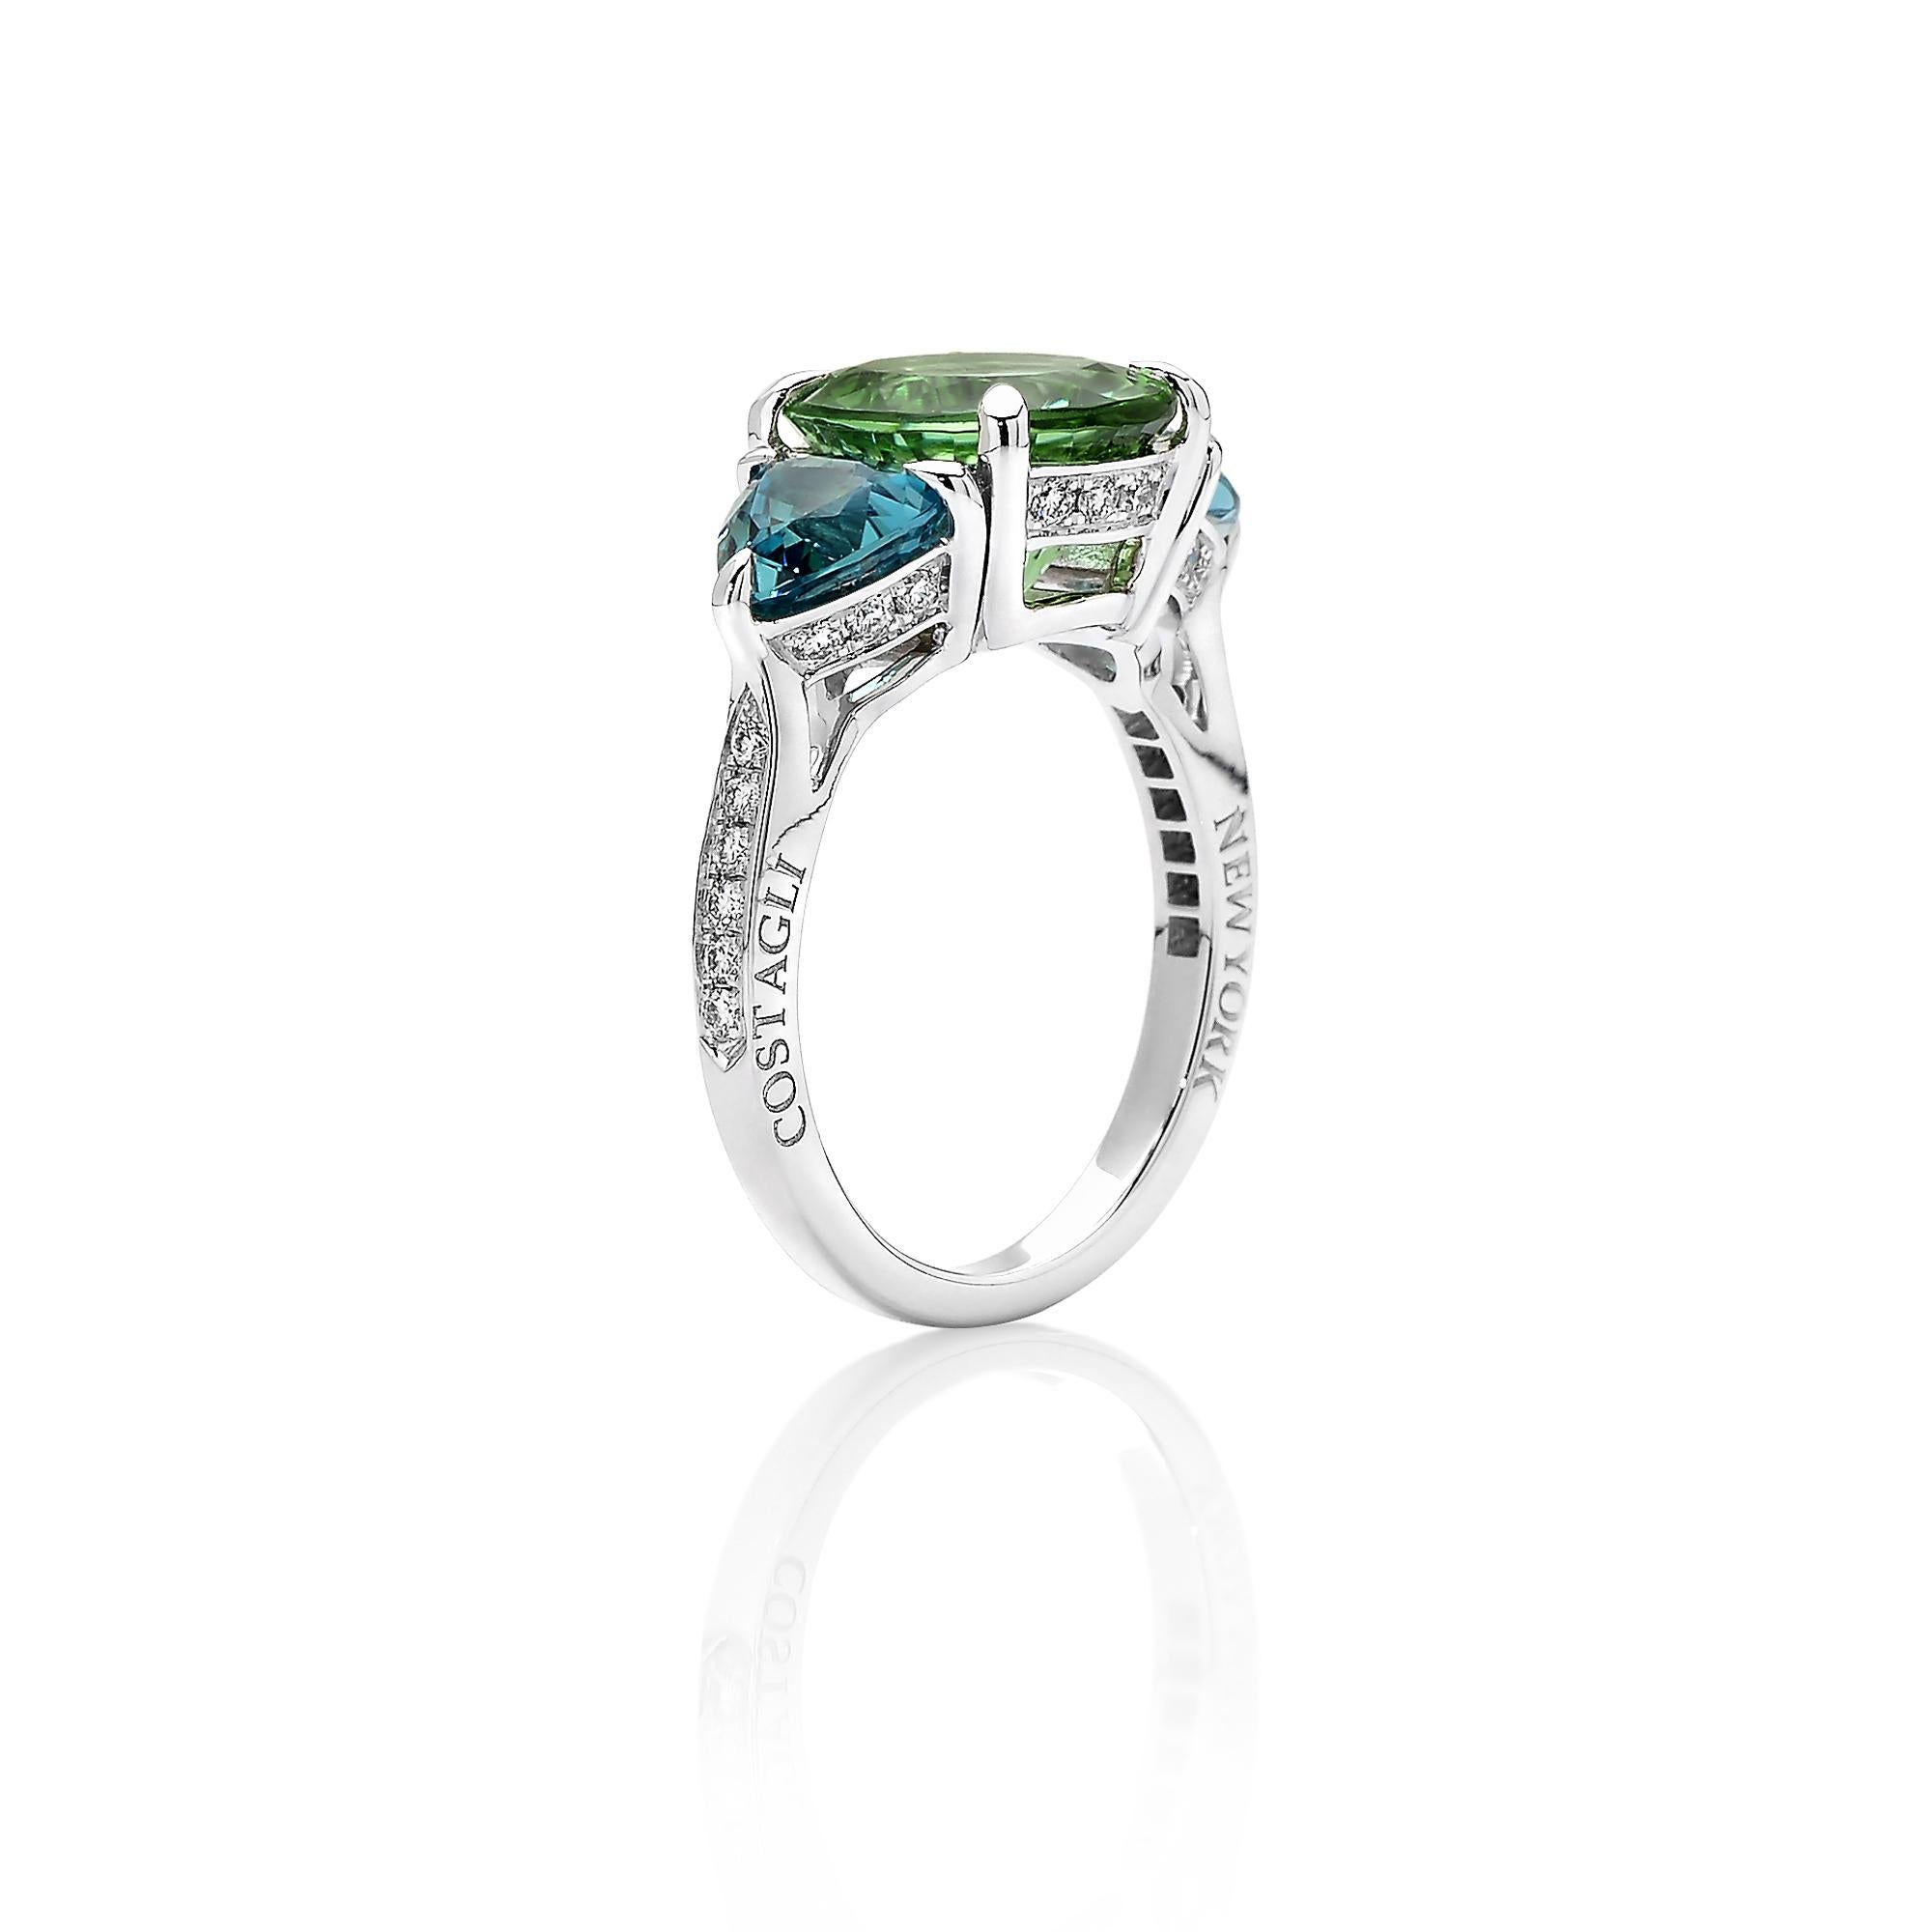 18 karat white gold ring featuring an oval-shape mint tourmaline flanked by two trillion-shaped blue tourmalines with round, brilliant diamond detailing. 

This ring is a testament to Paolo's expertise in color. The mint hue is further enhanced in